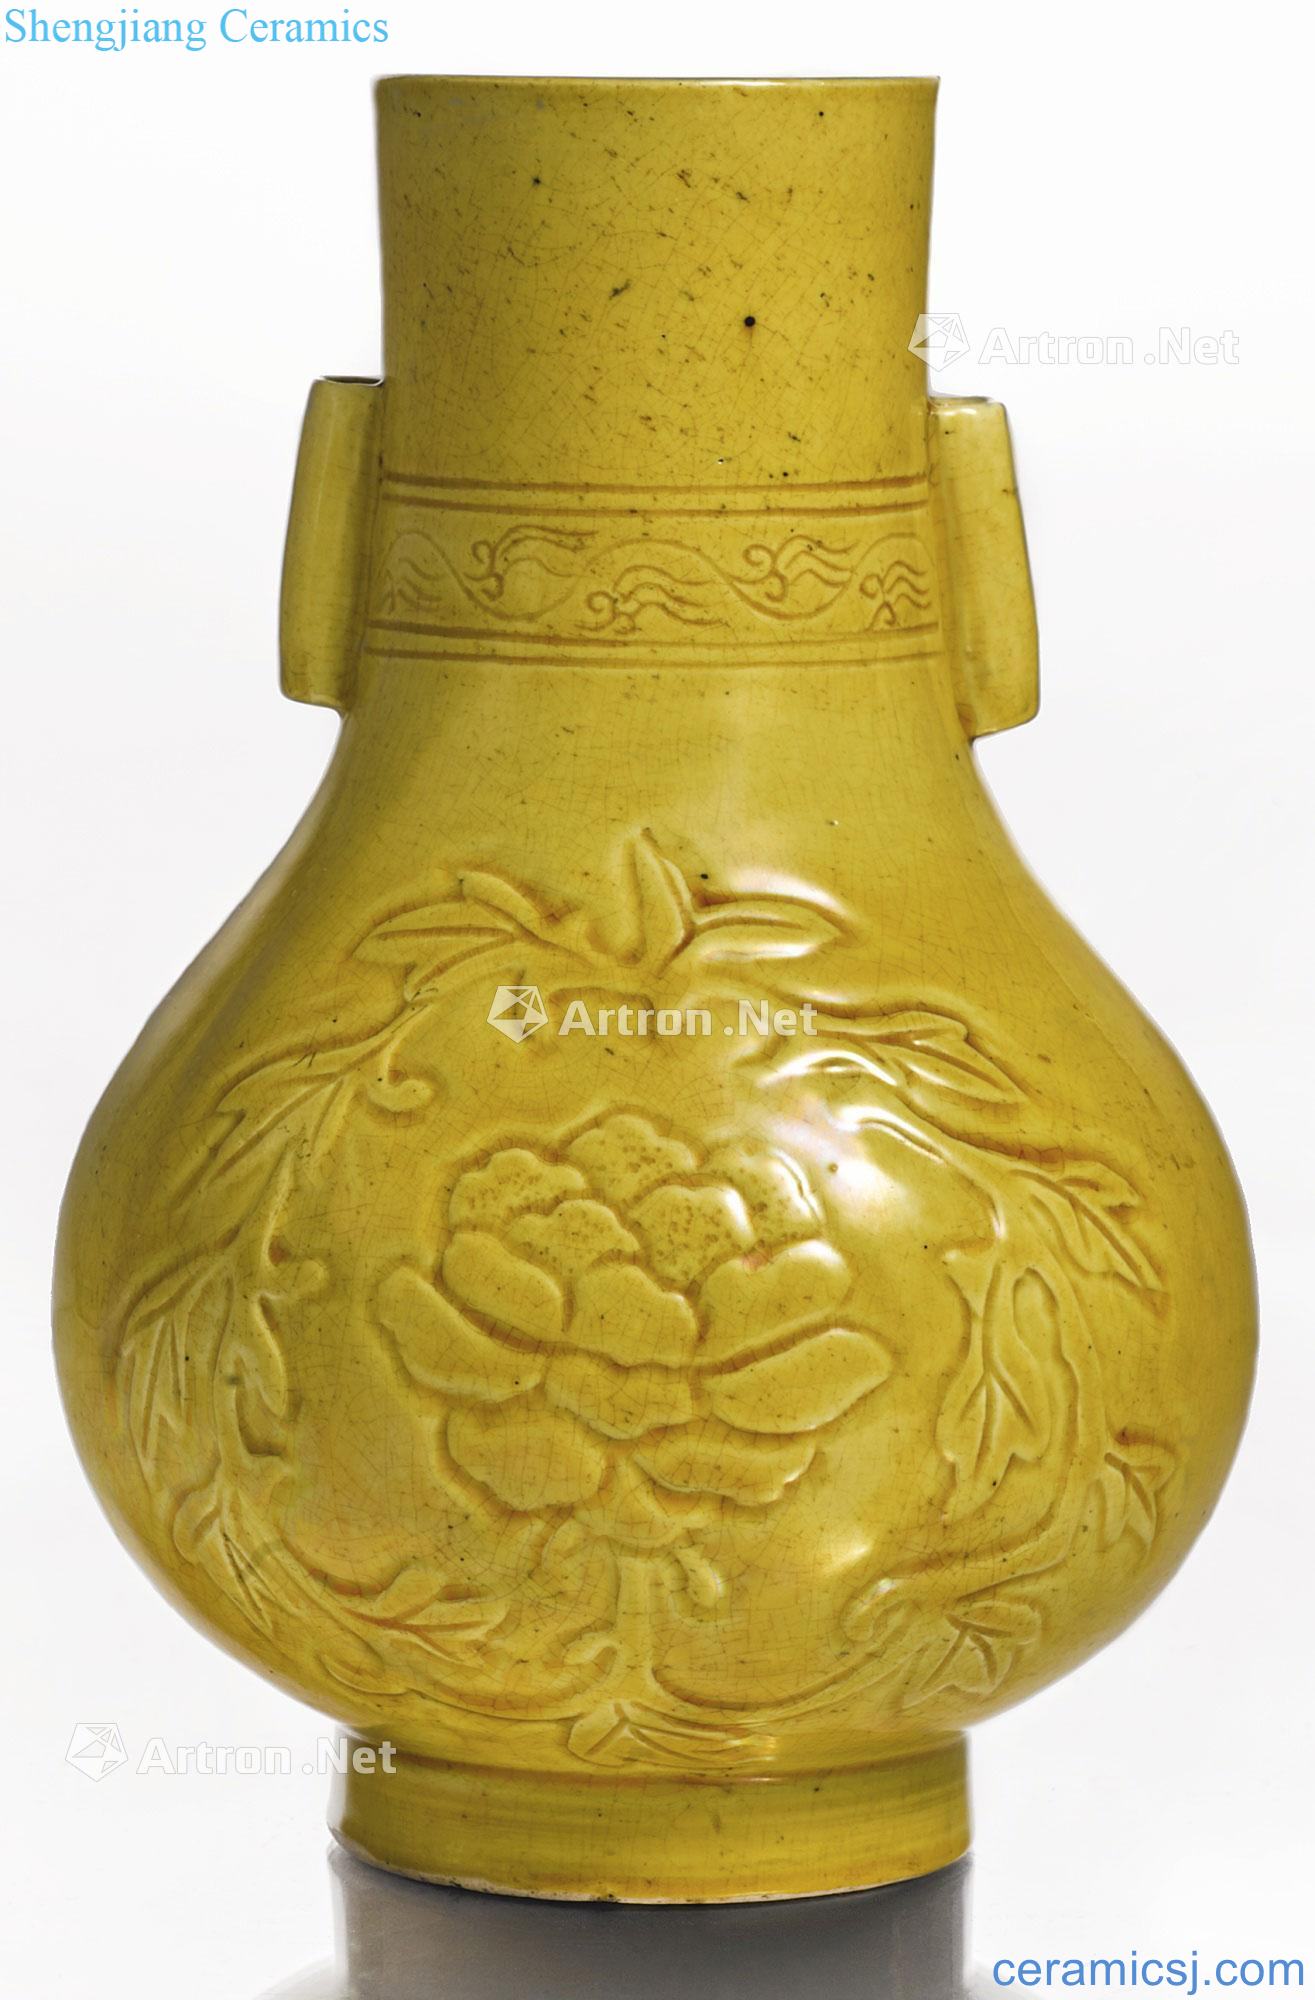 The late Ming dynasty/17th century at the beginning of the qing dynasty Yellow glaze peony grains your ear pot